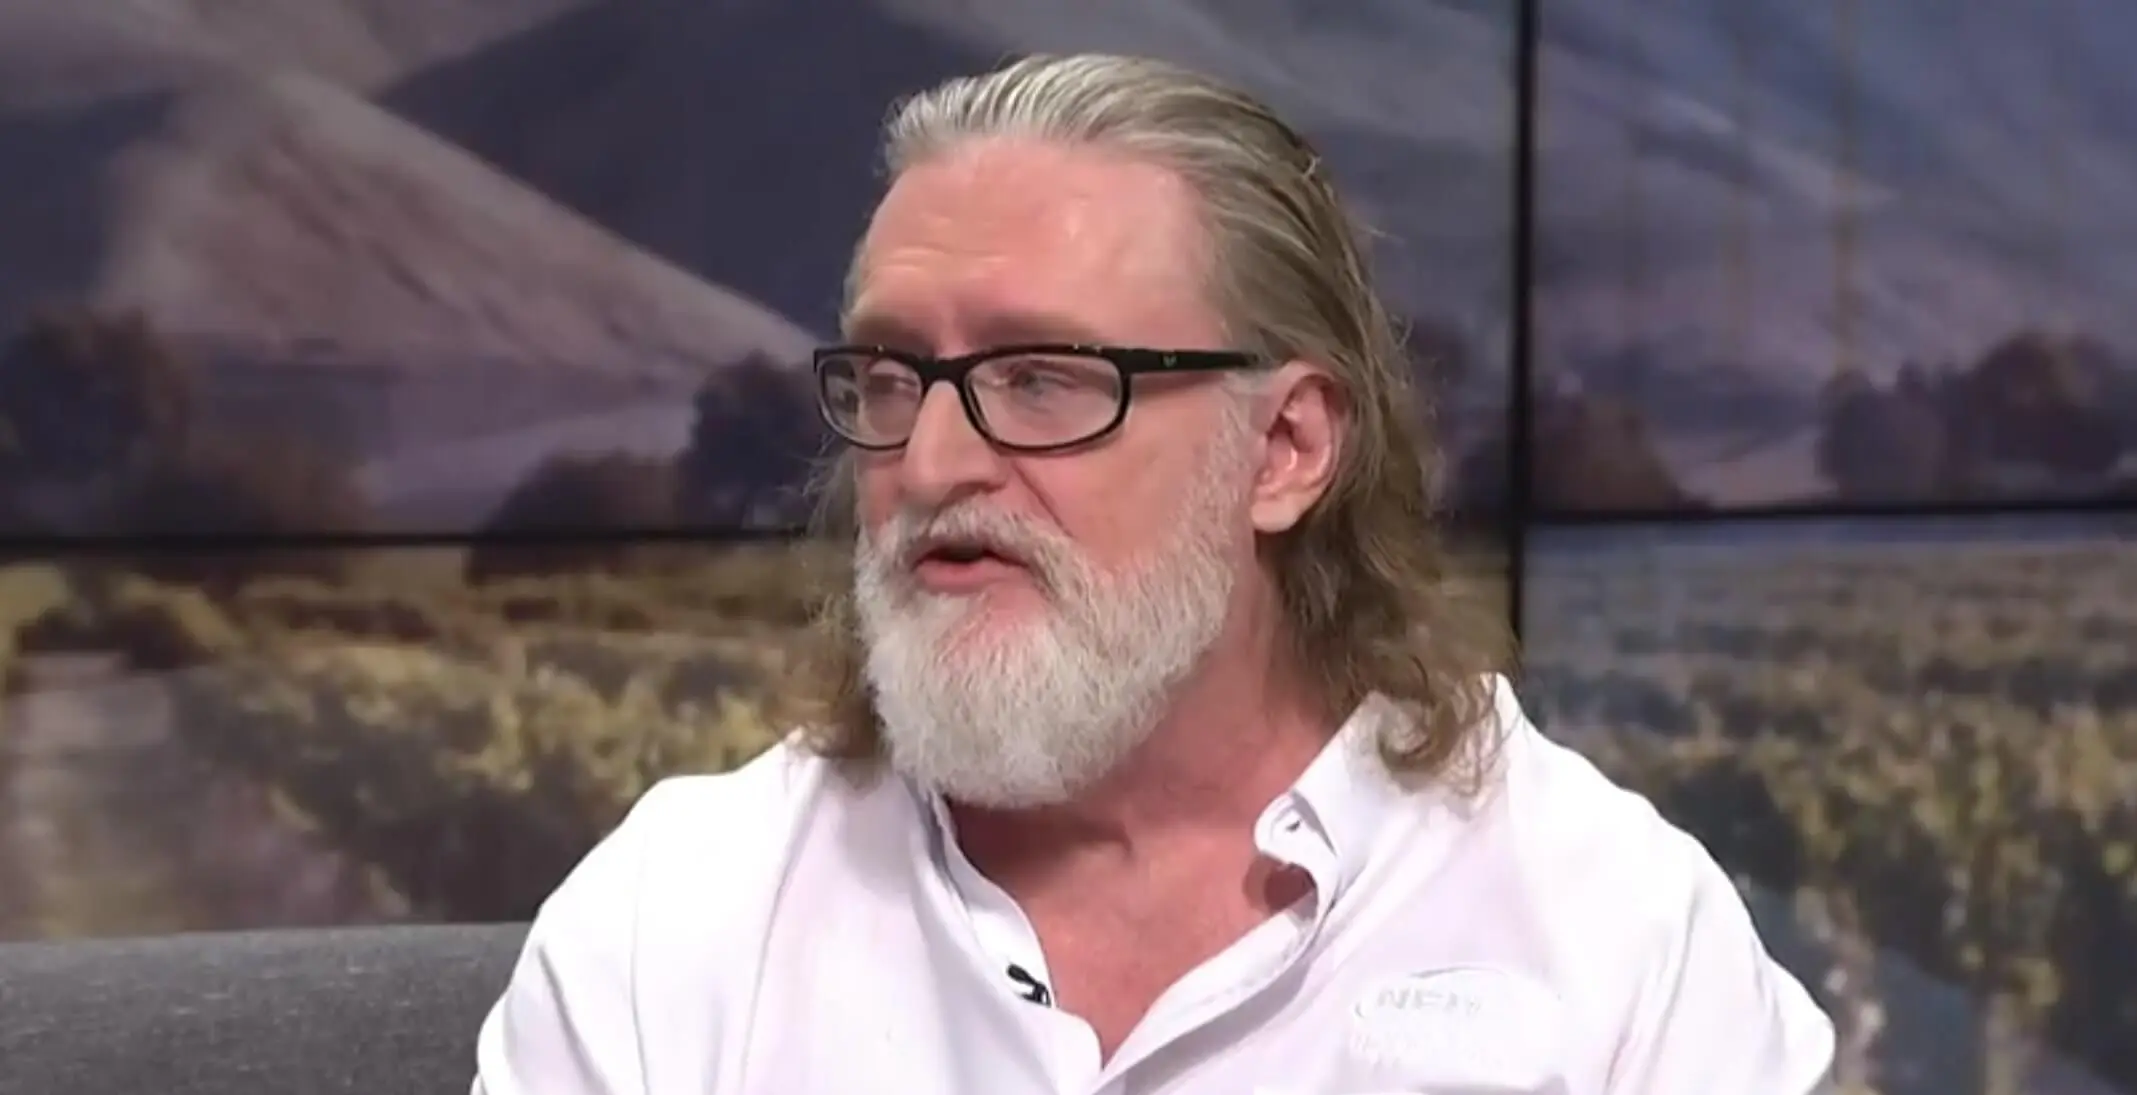 Steam's Gabe Newell to send a gnome to space, Alyx Vance unimpressed